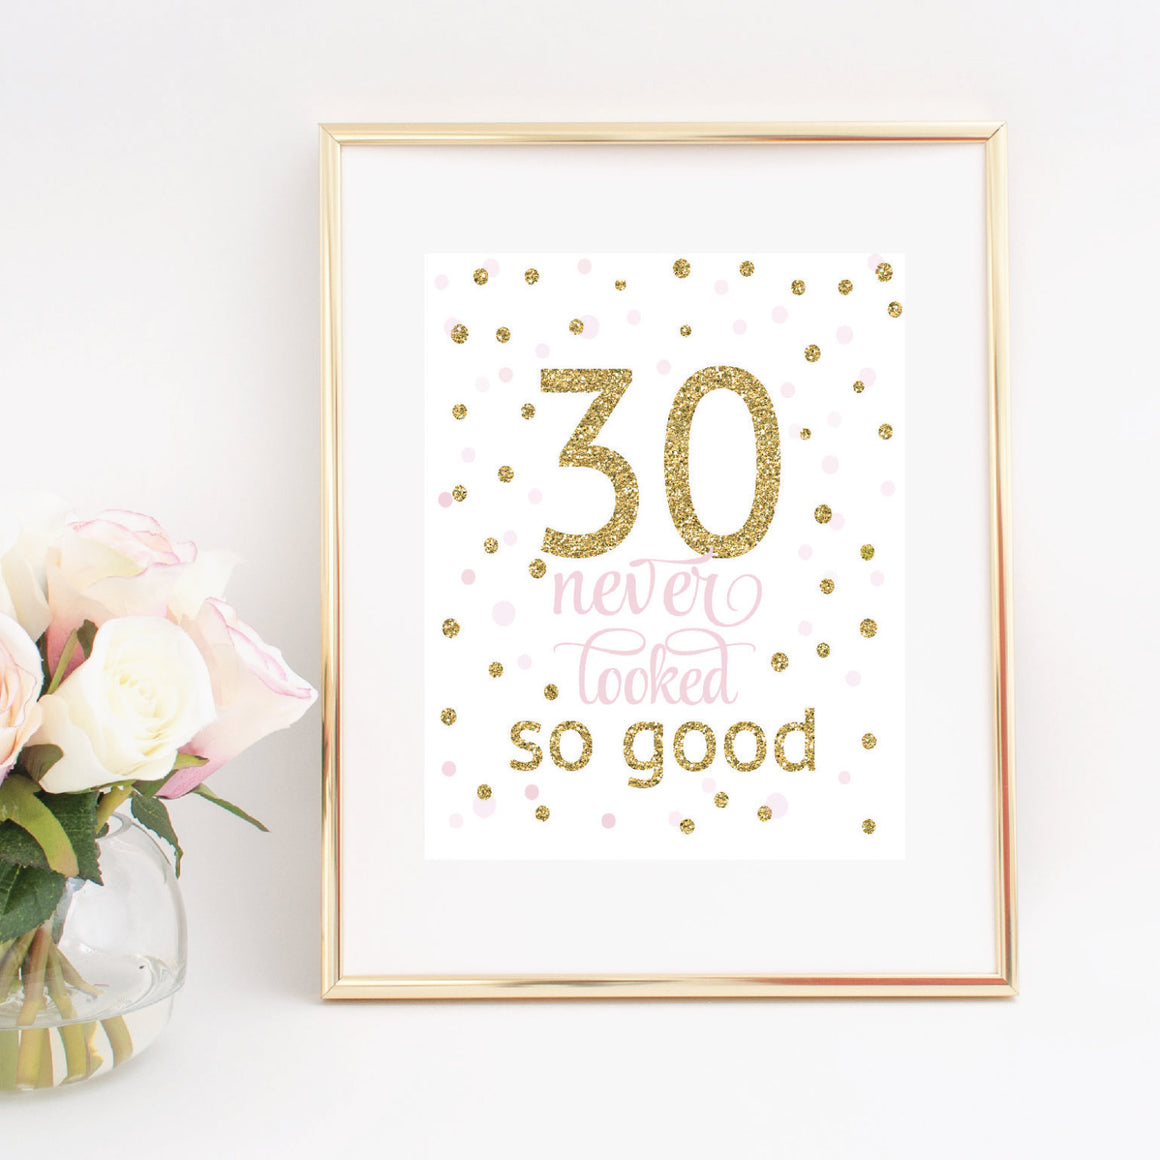 30 never looked so good digital printable download in gold frame with flowers on white background